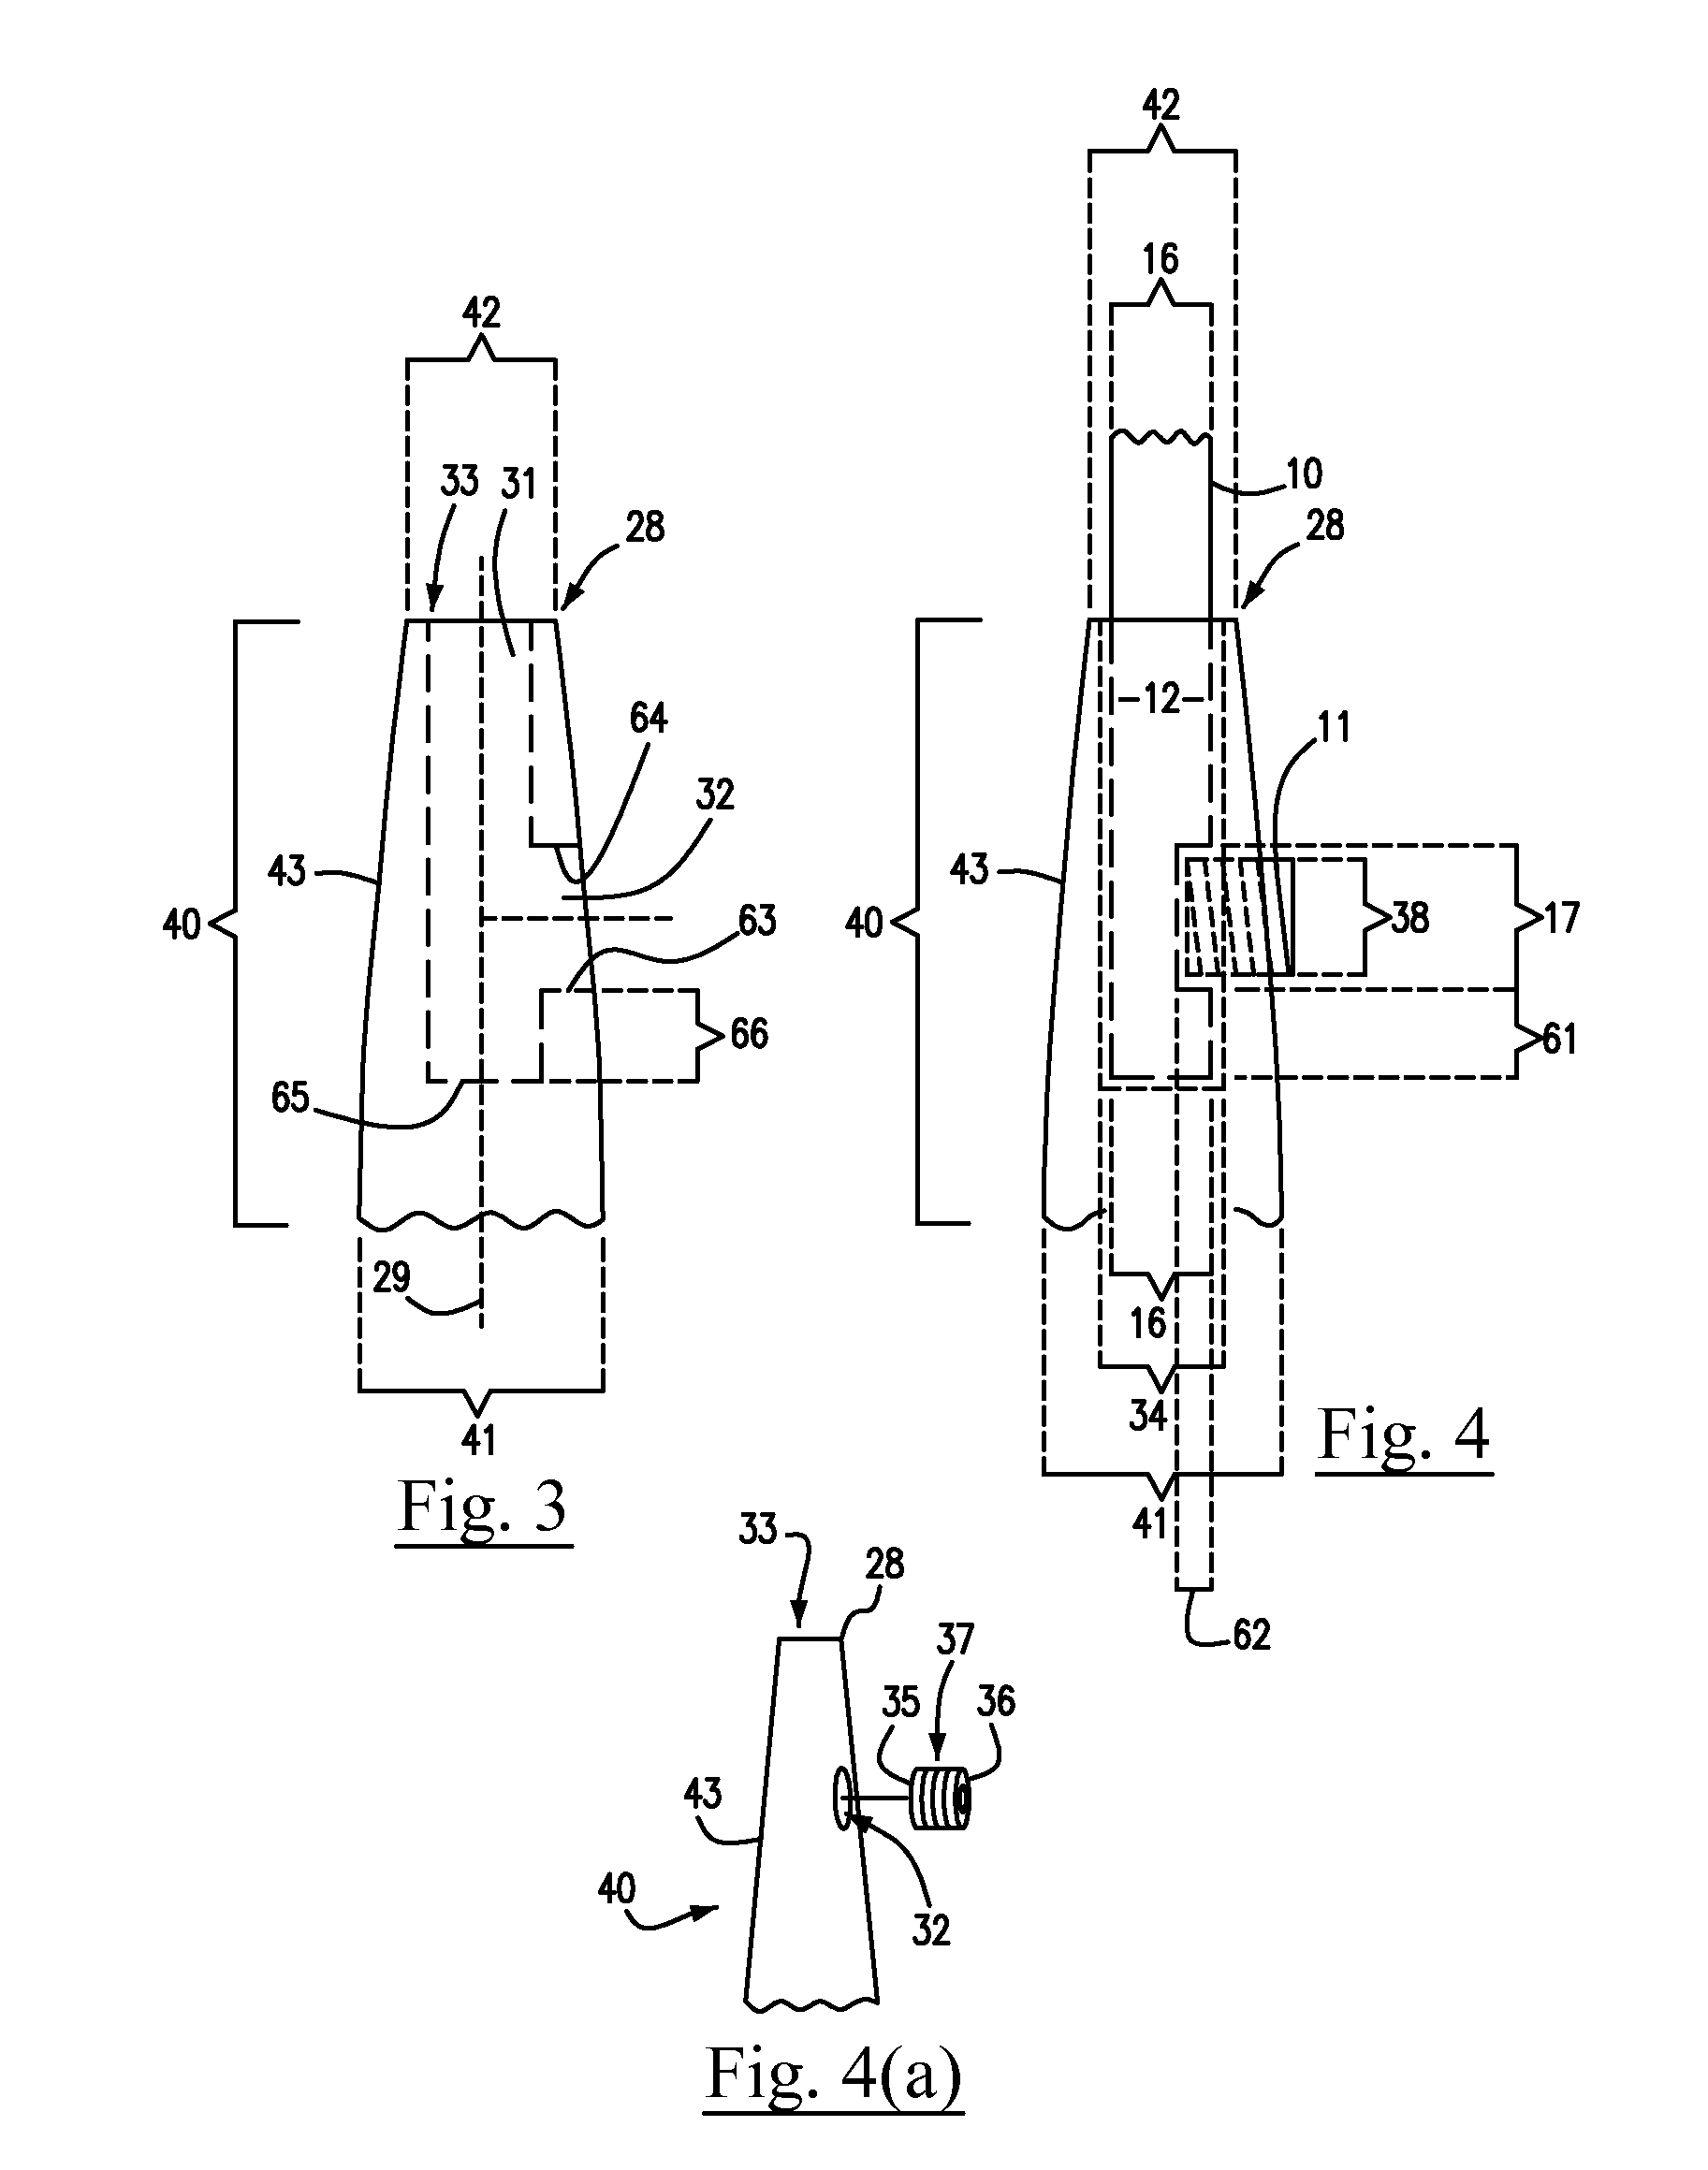 Drill Bit System and Method for Forming Holes in Materials